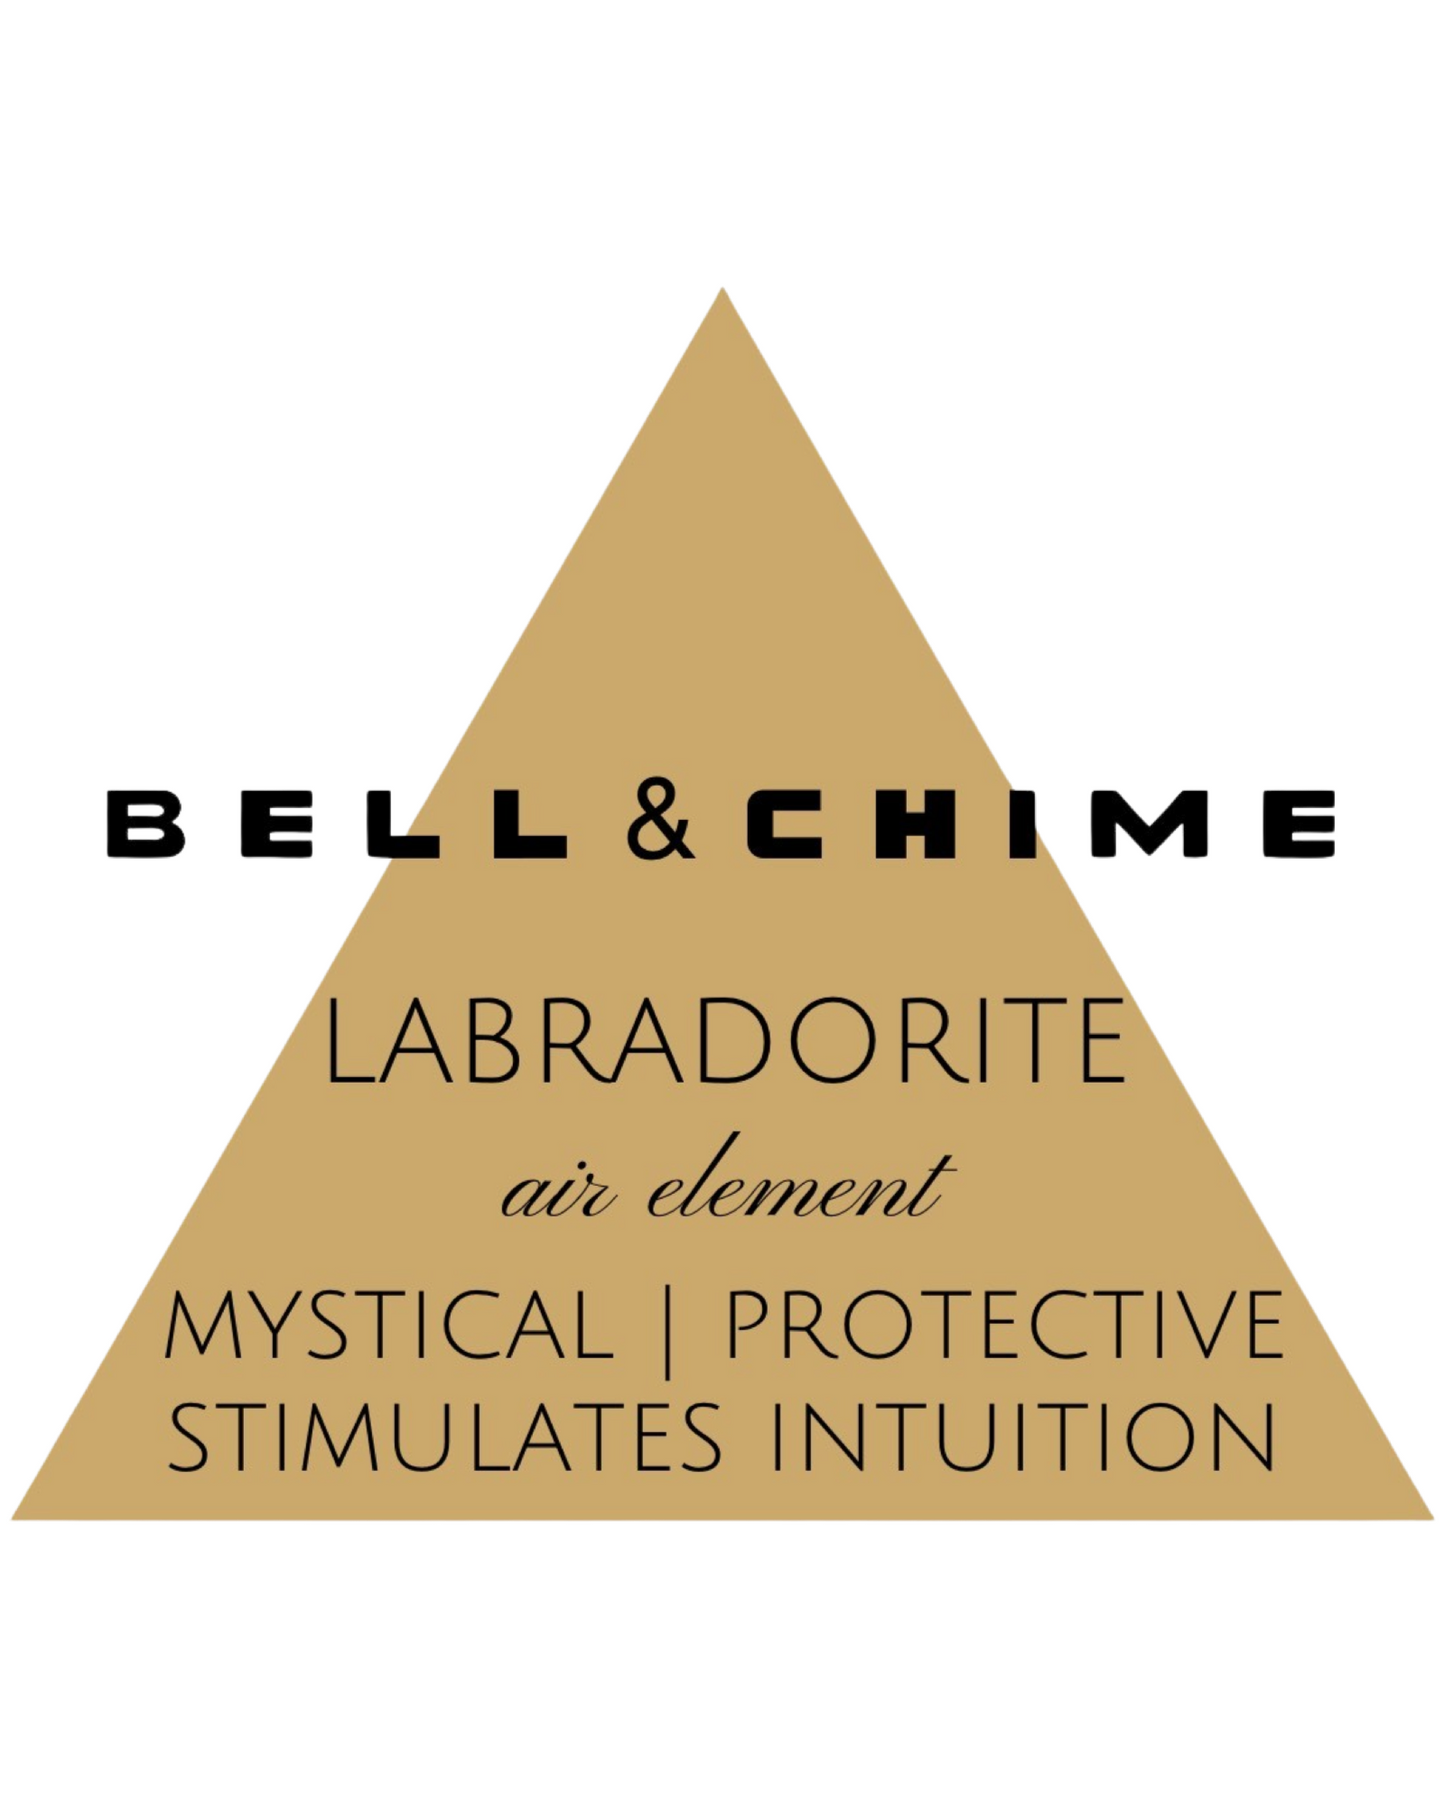 Bell & Chime: Air Element "Mystical, Protective, Stimulates Intuition"